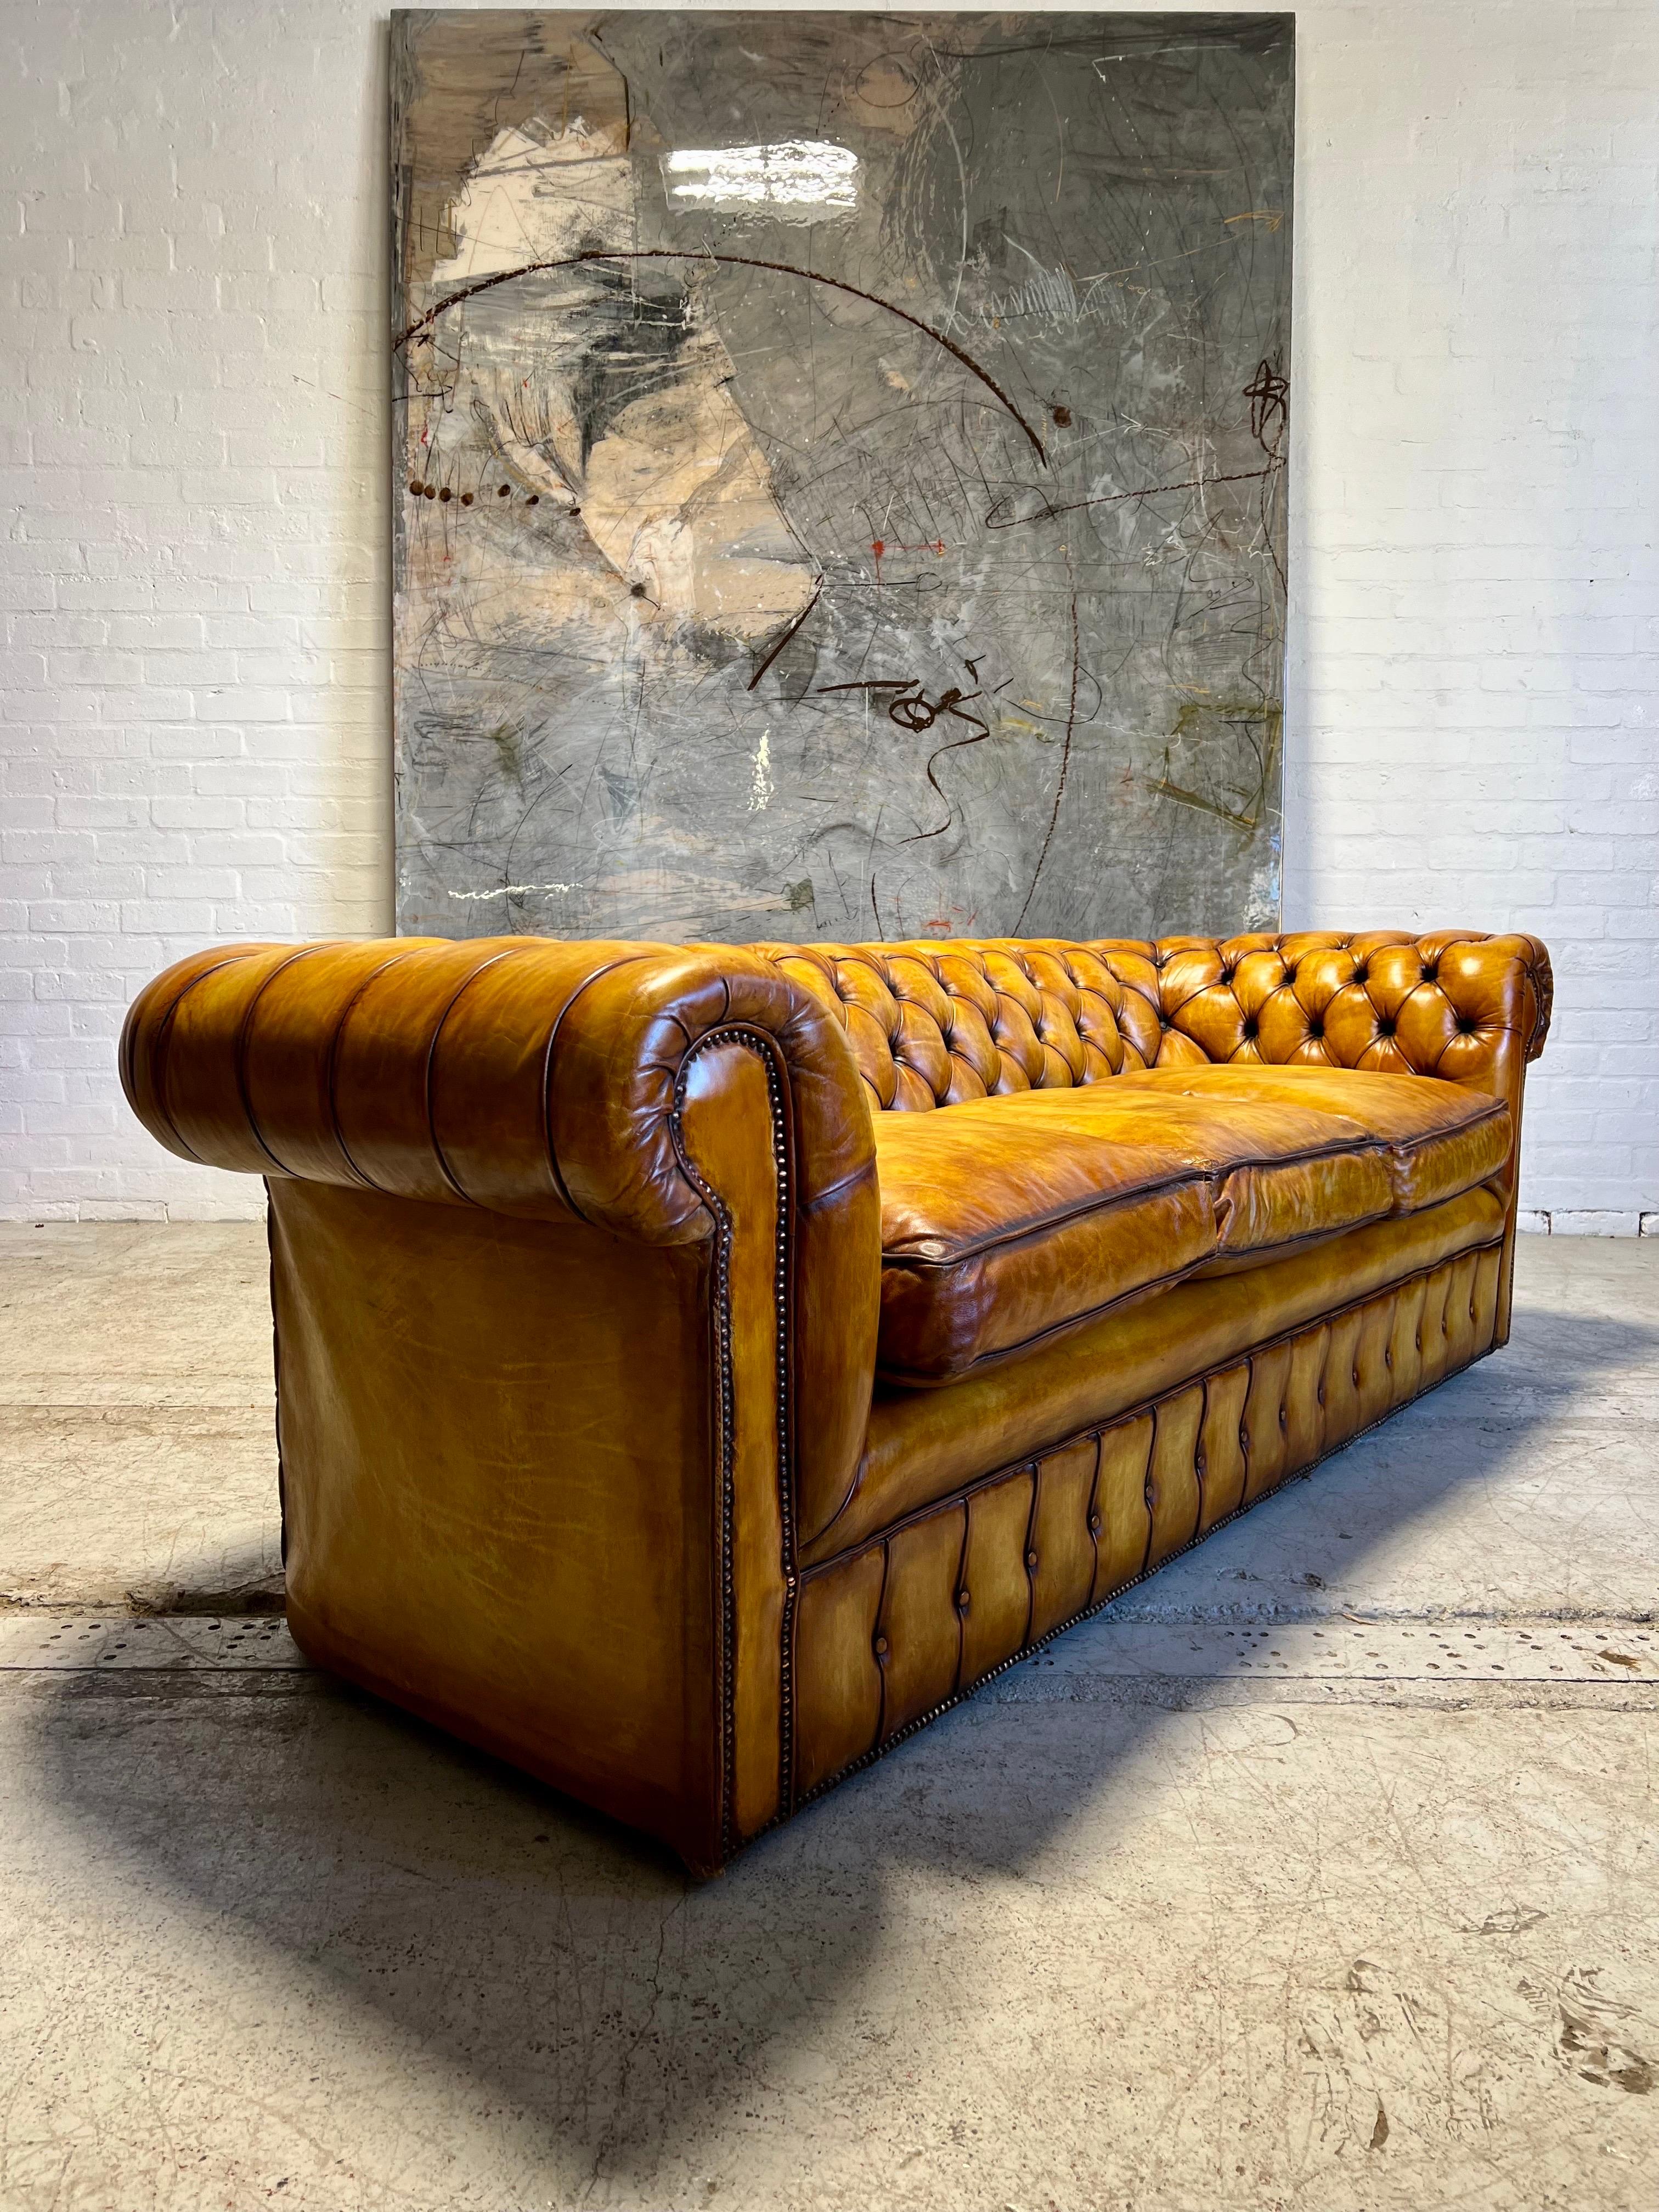 As a LAPADA dealer I always have a large stock of Chesterfield sofas and chairs ranging from early 19thC through to present day. We also craft our own Signature Collection in-house.

This particular Chesterfield is a truly beautiful piece!

It